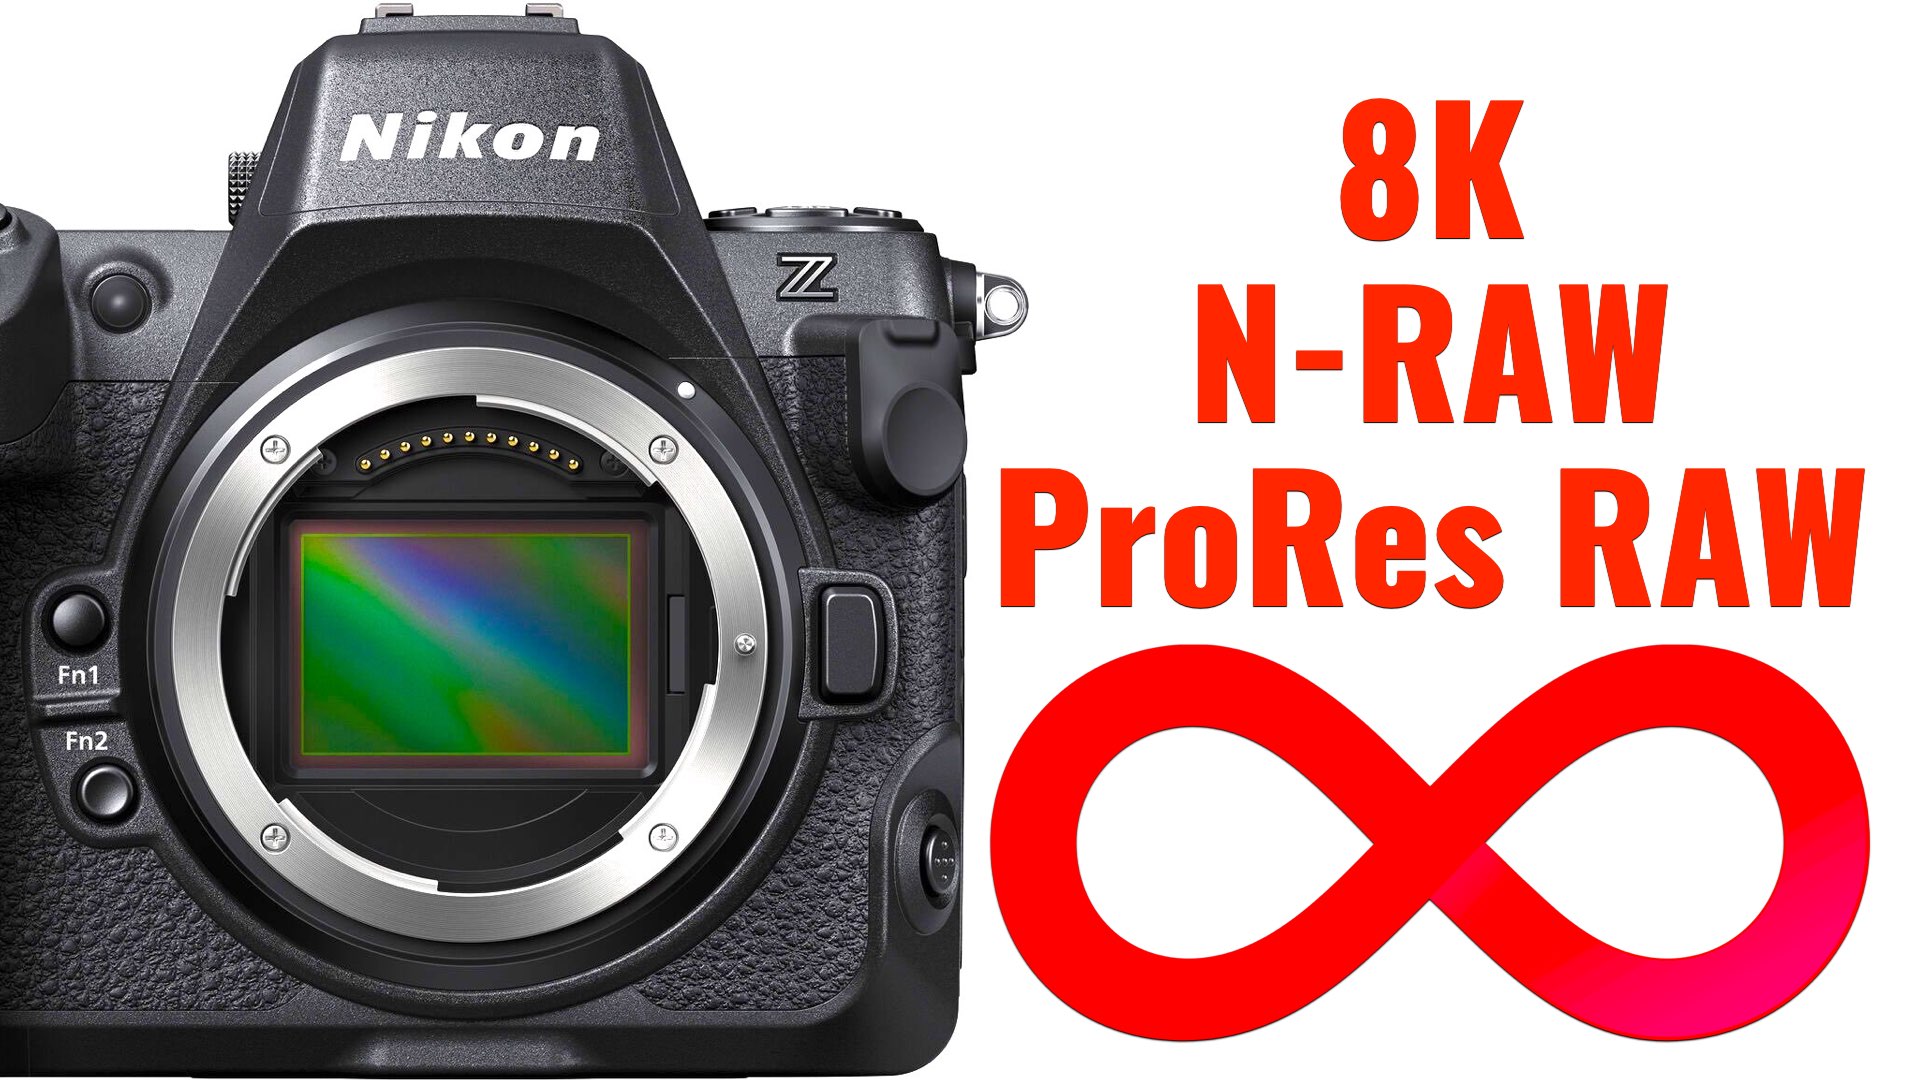 Nikon Z8 Never Overheats When Shooting 8K Compressed RAW